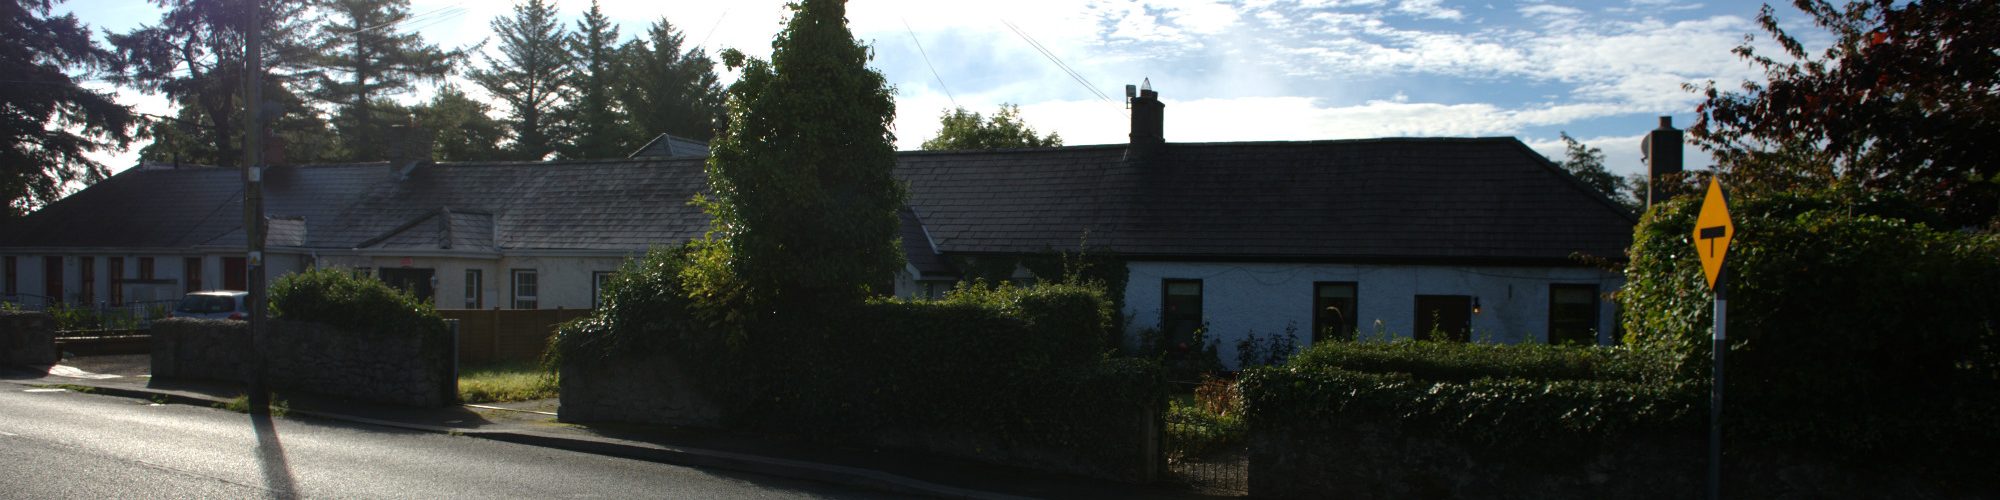 Ivy Terrace on the Blessington Village Heritage Trail